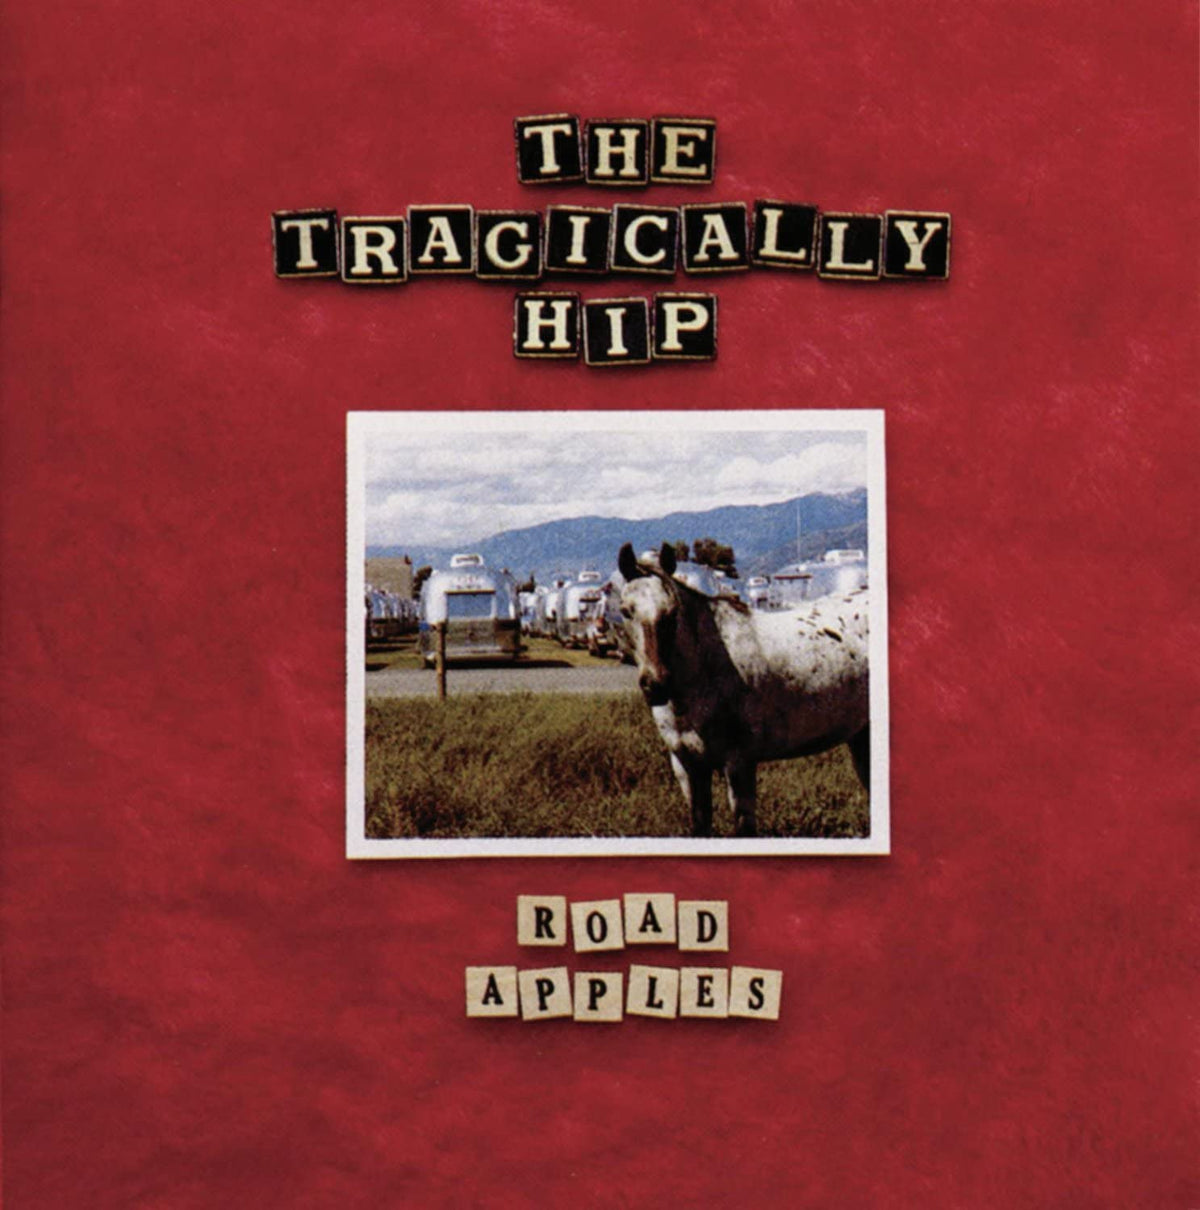 The Tragically Hip - Road Apples (LP)